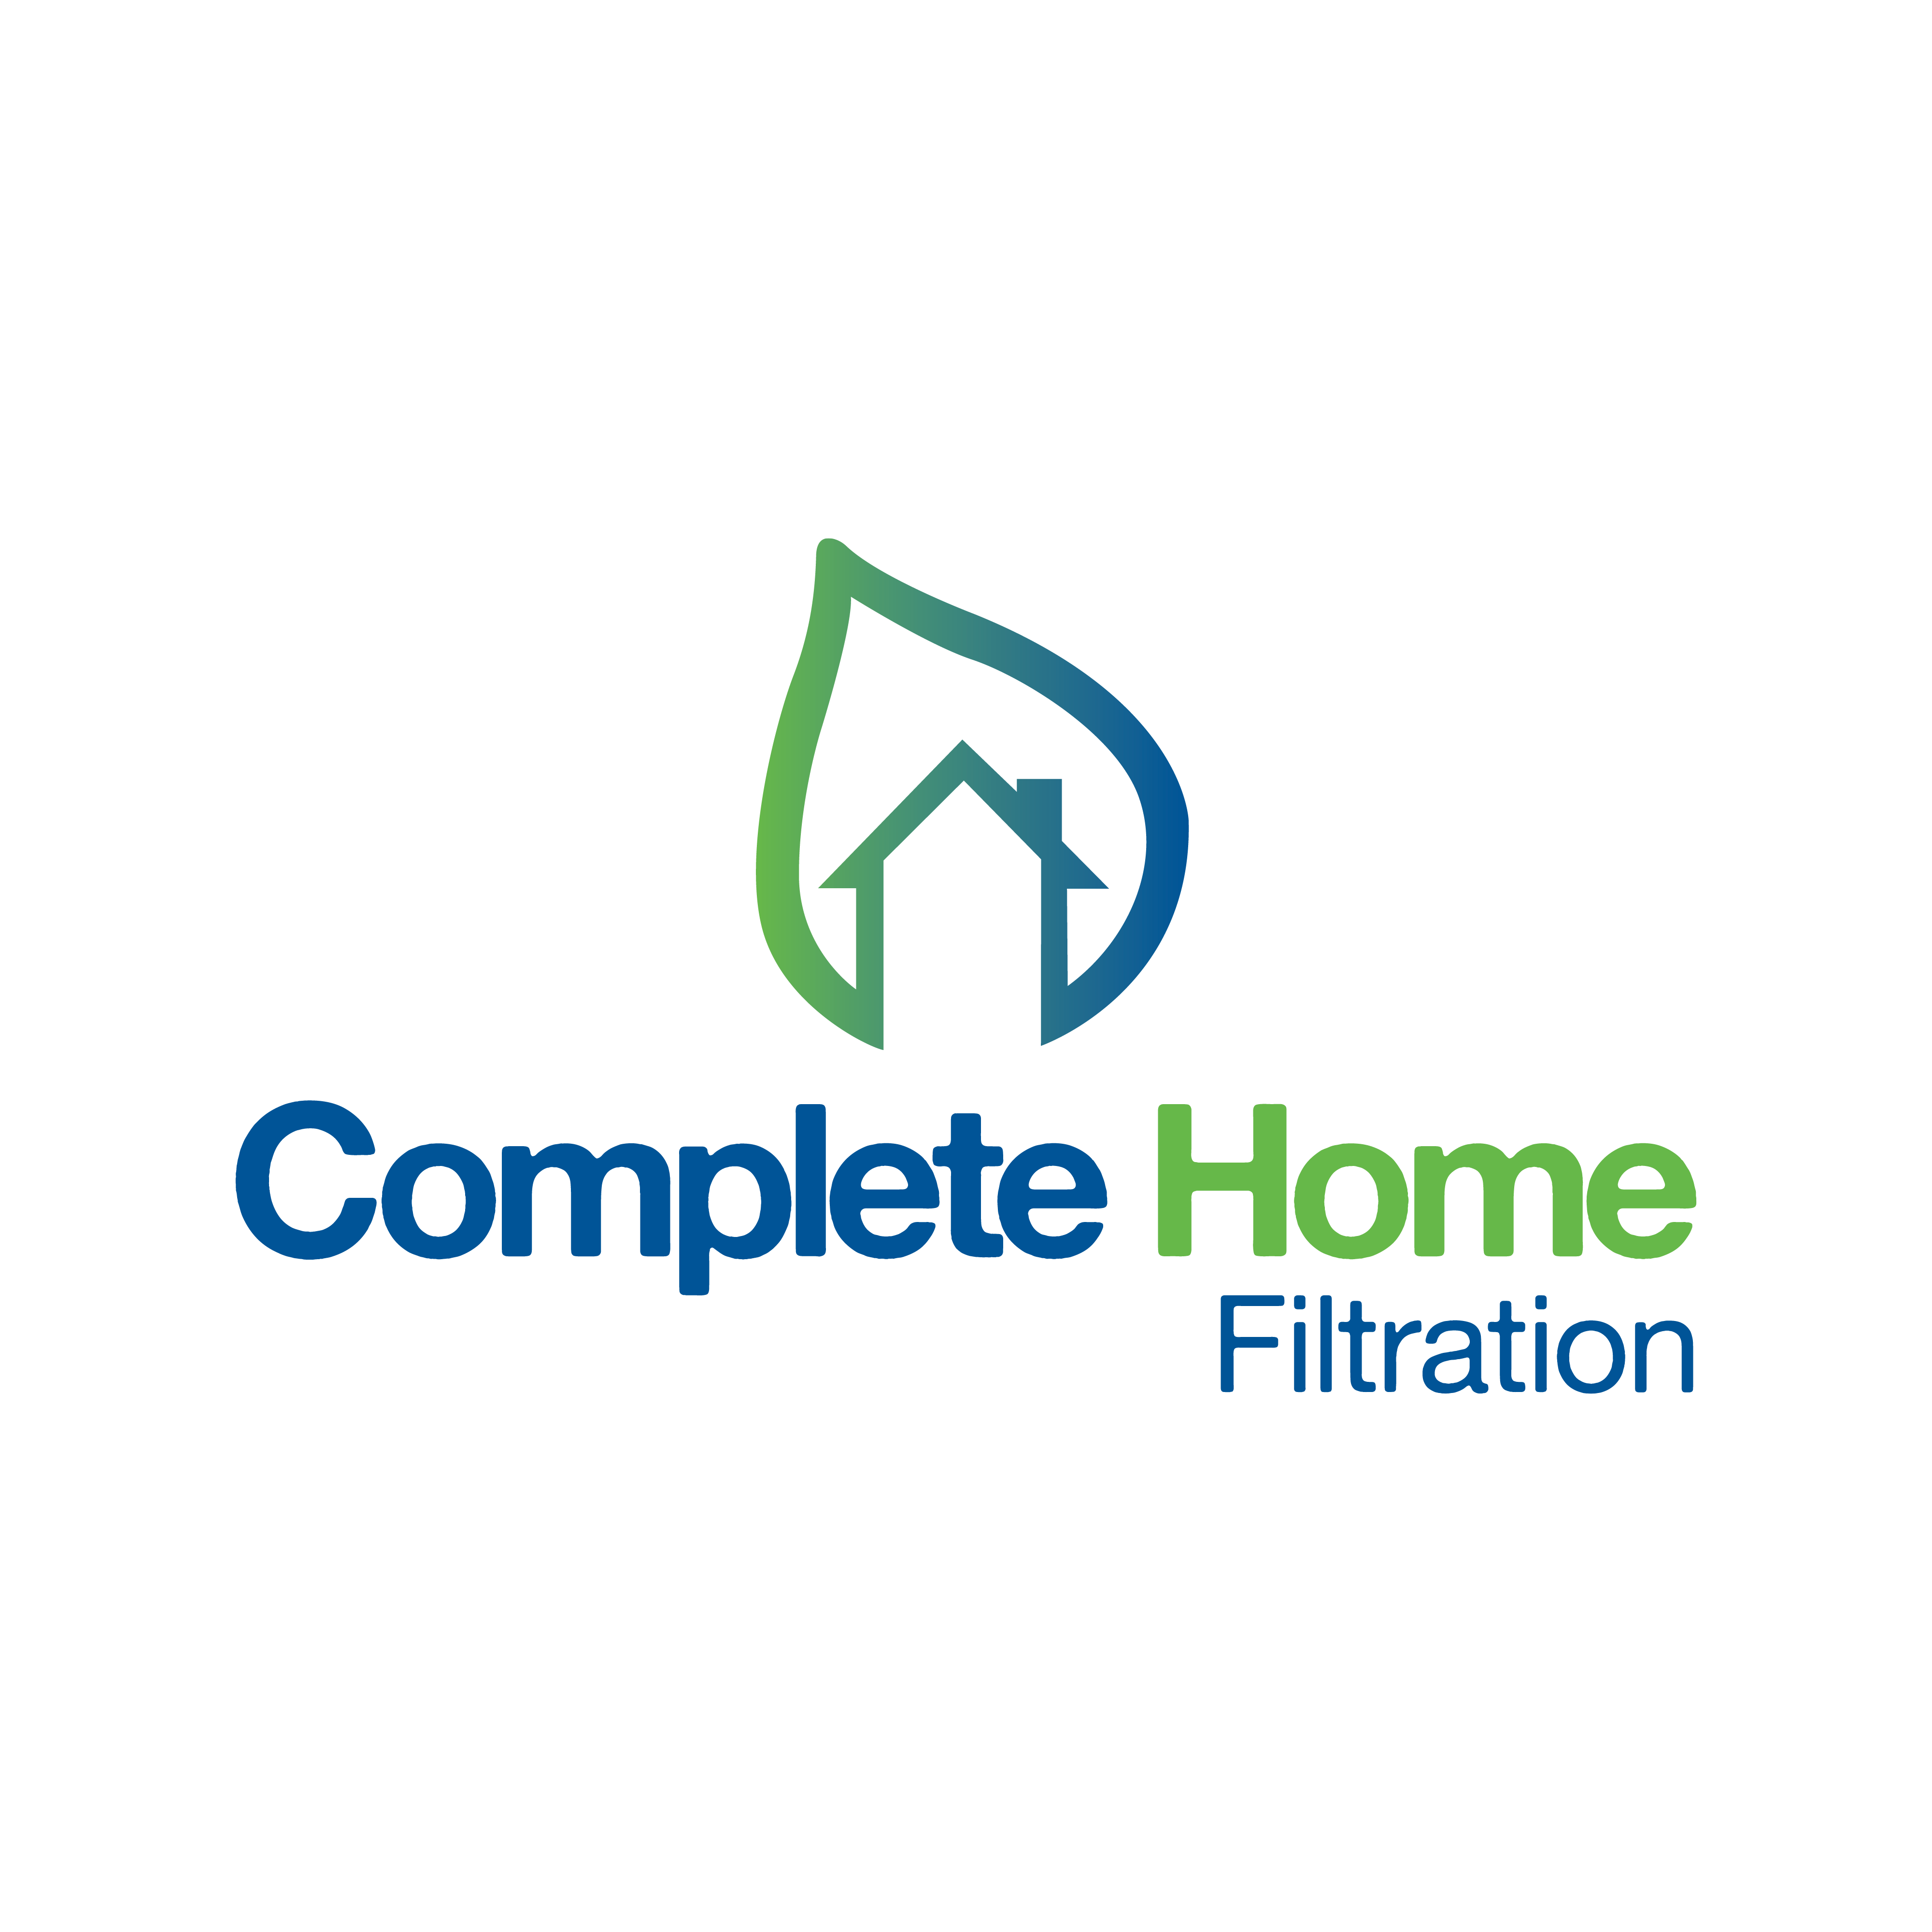 Complete Home Filtration